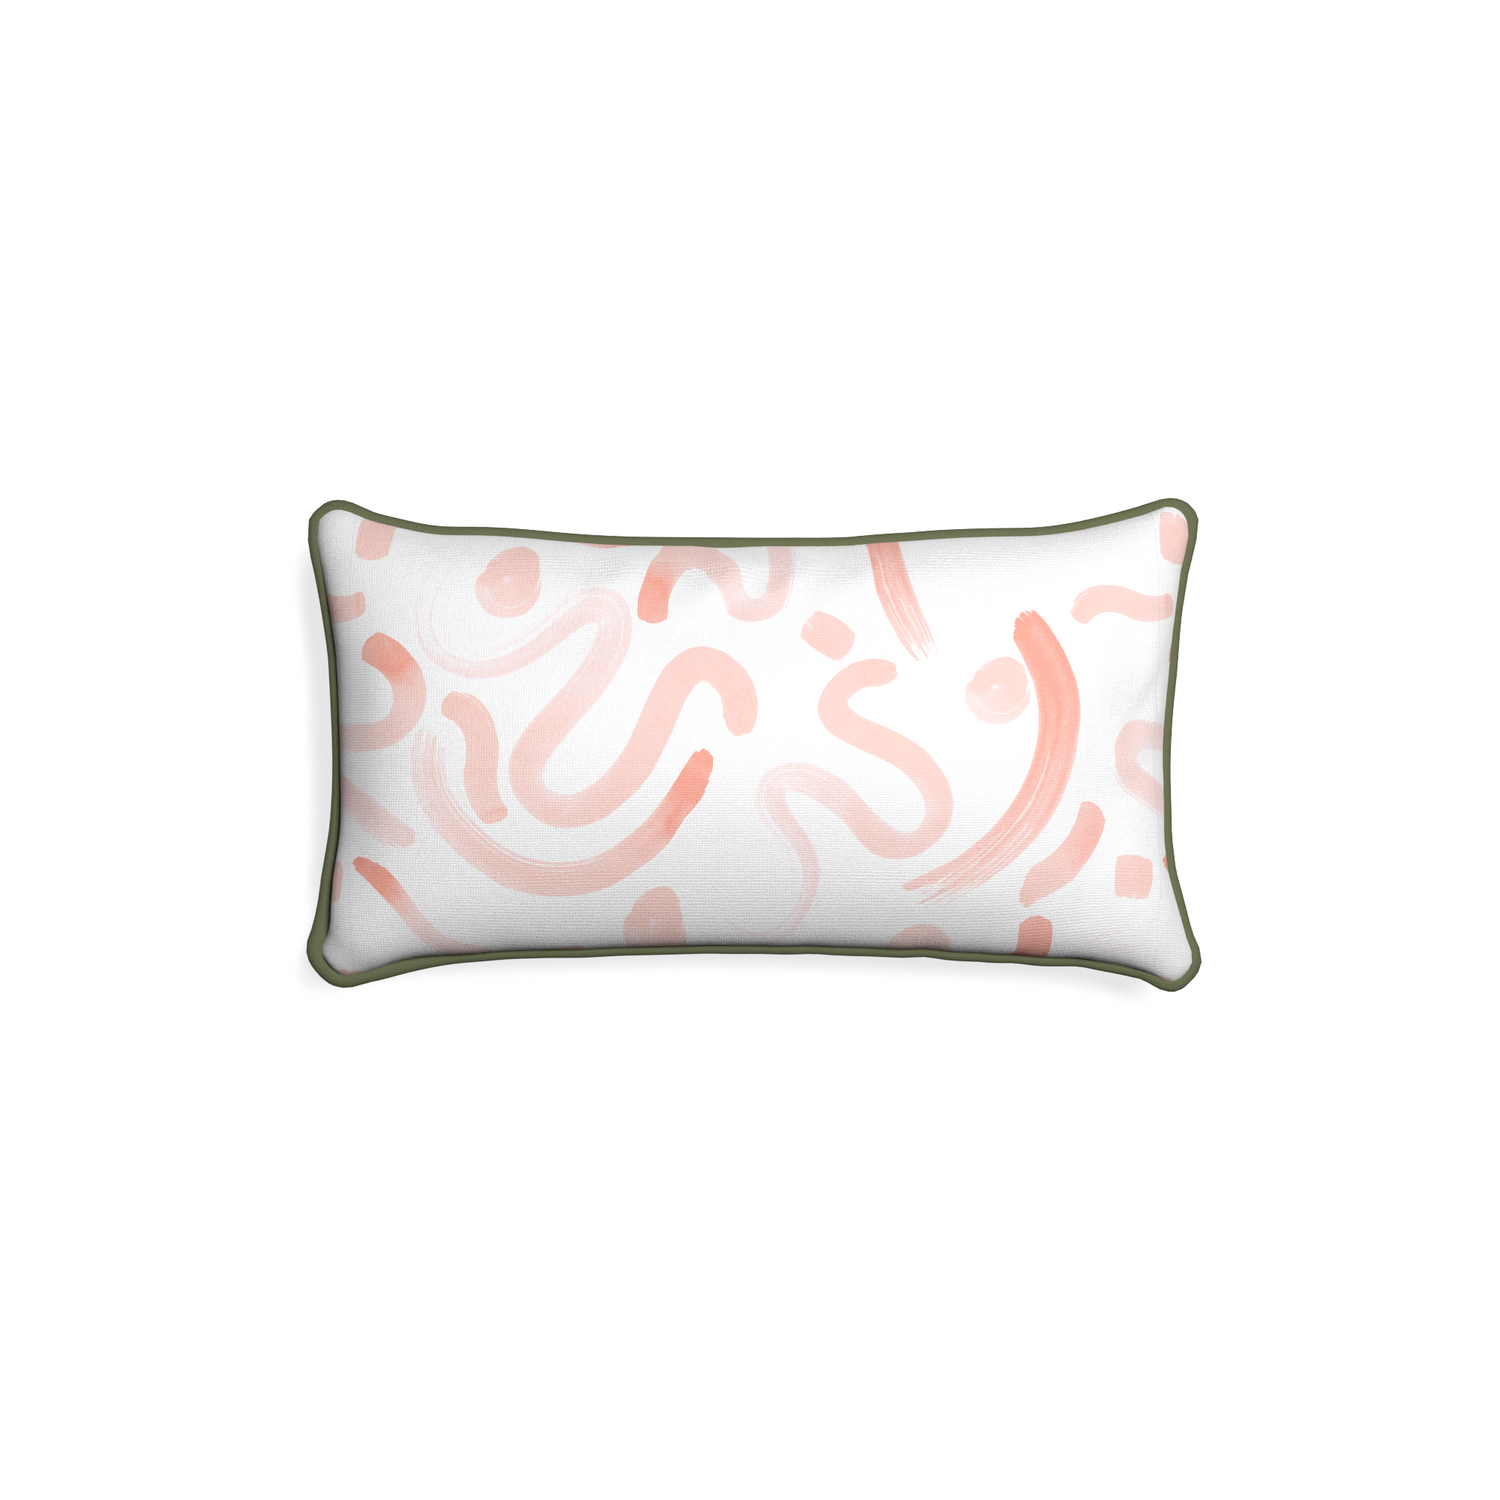 Petite-lumbar hockney pink custom pink graphicpillow with f piping on white background